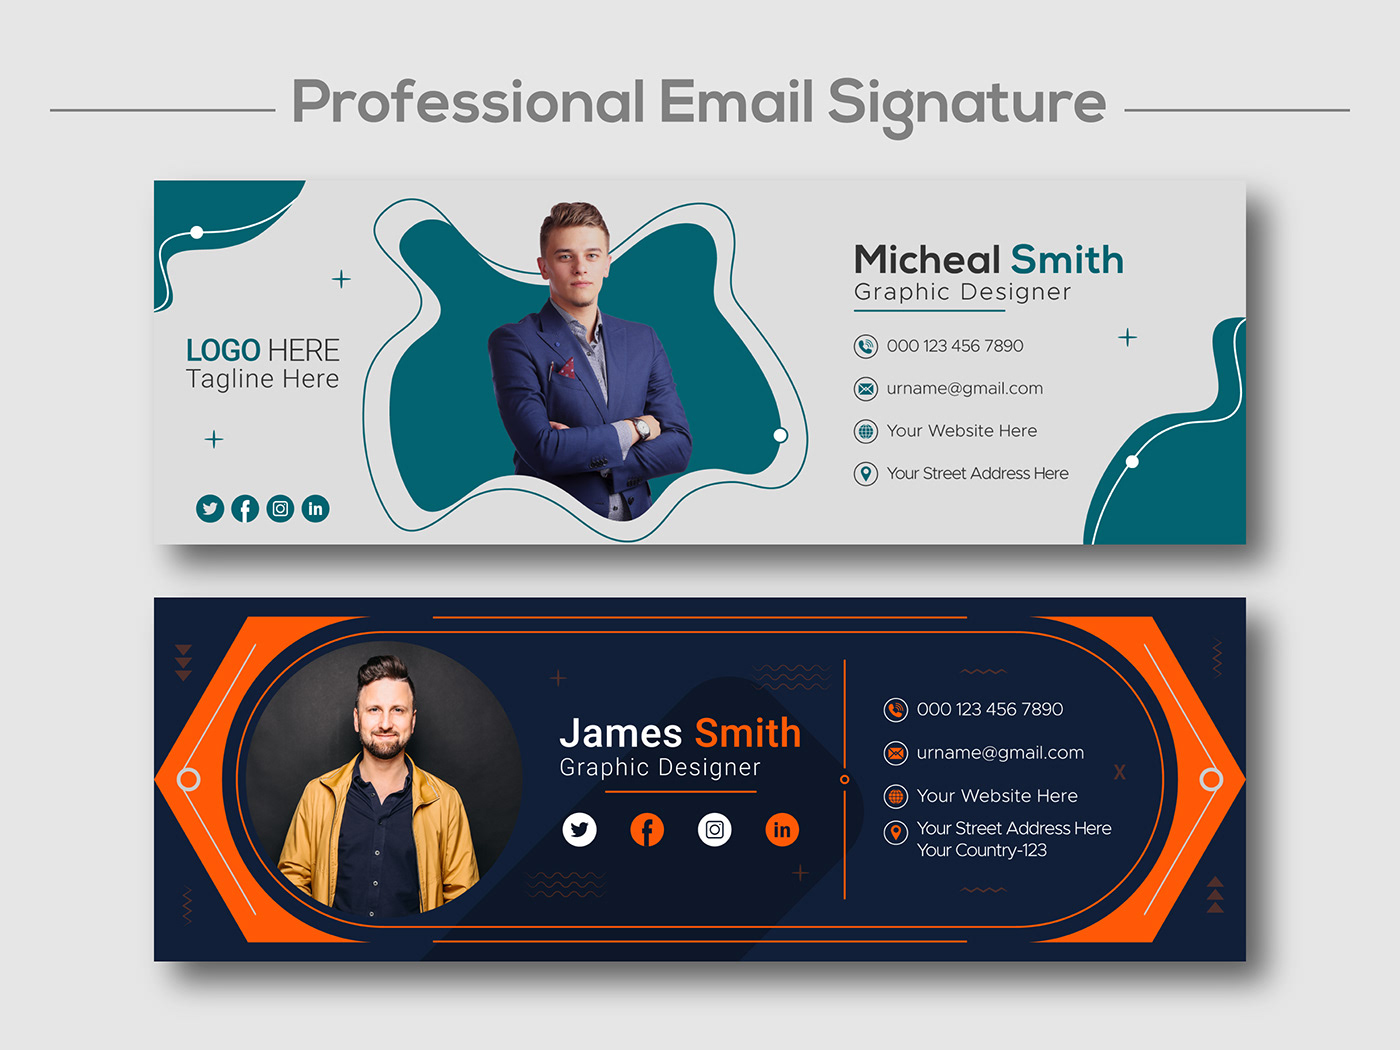 banner corporate cover Email Footer email signature facebook banner signature social media cover Social Media Design Social media post